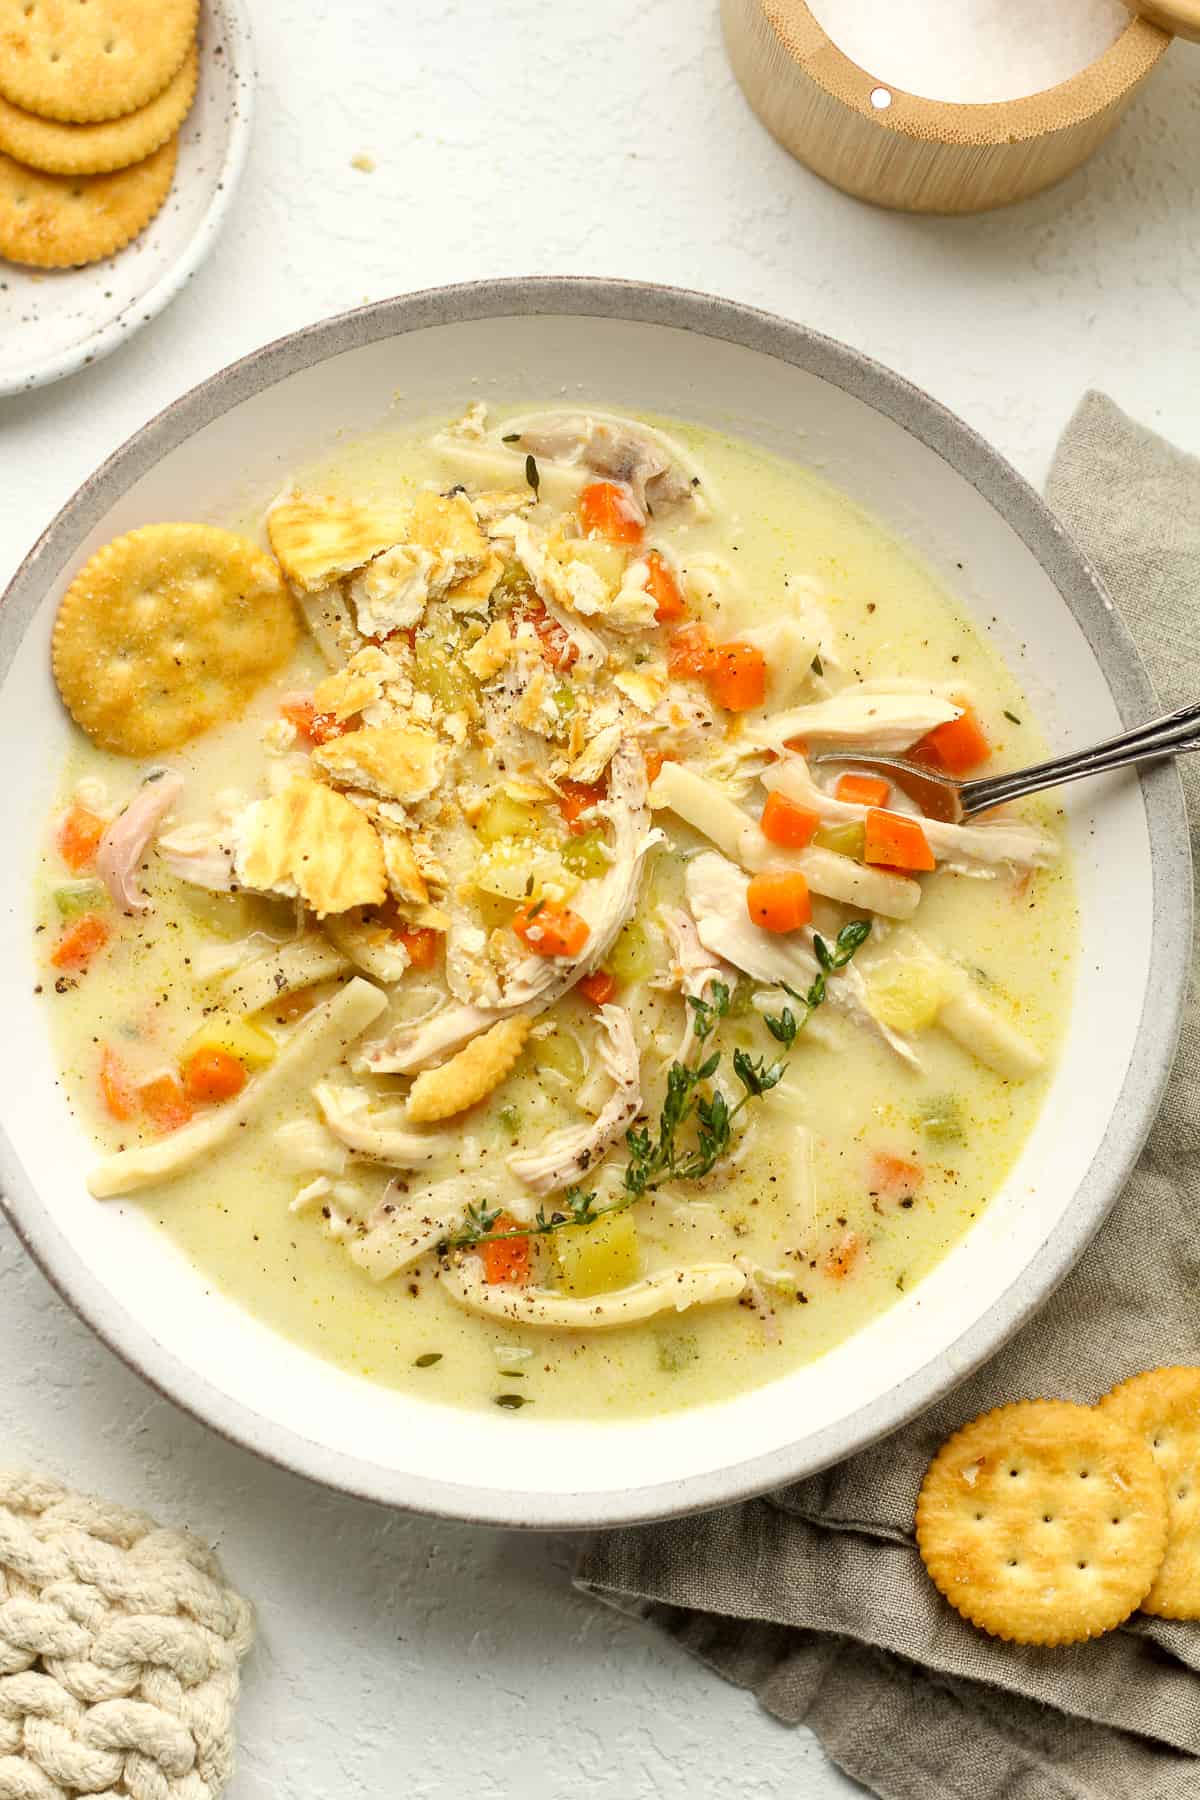 A gray and white bowl of chicken noodle soup.